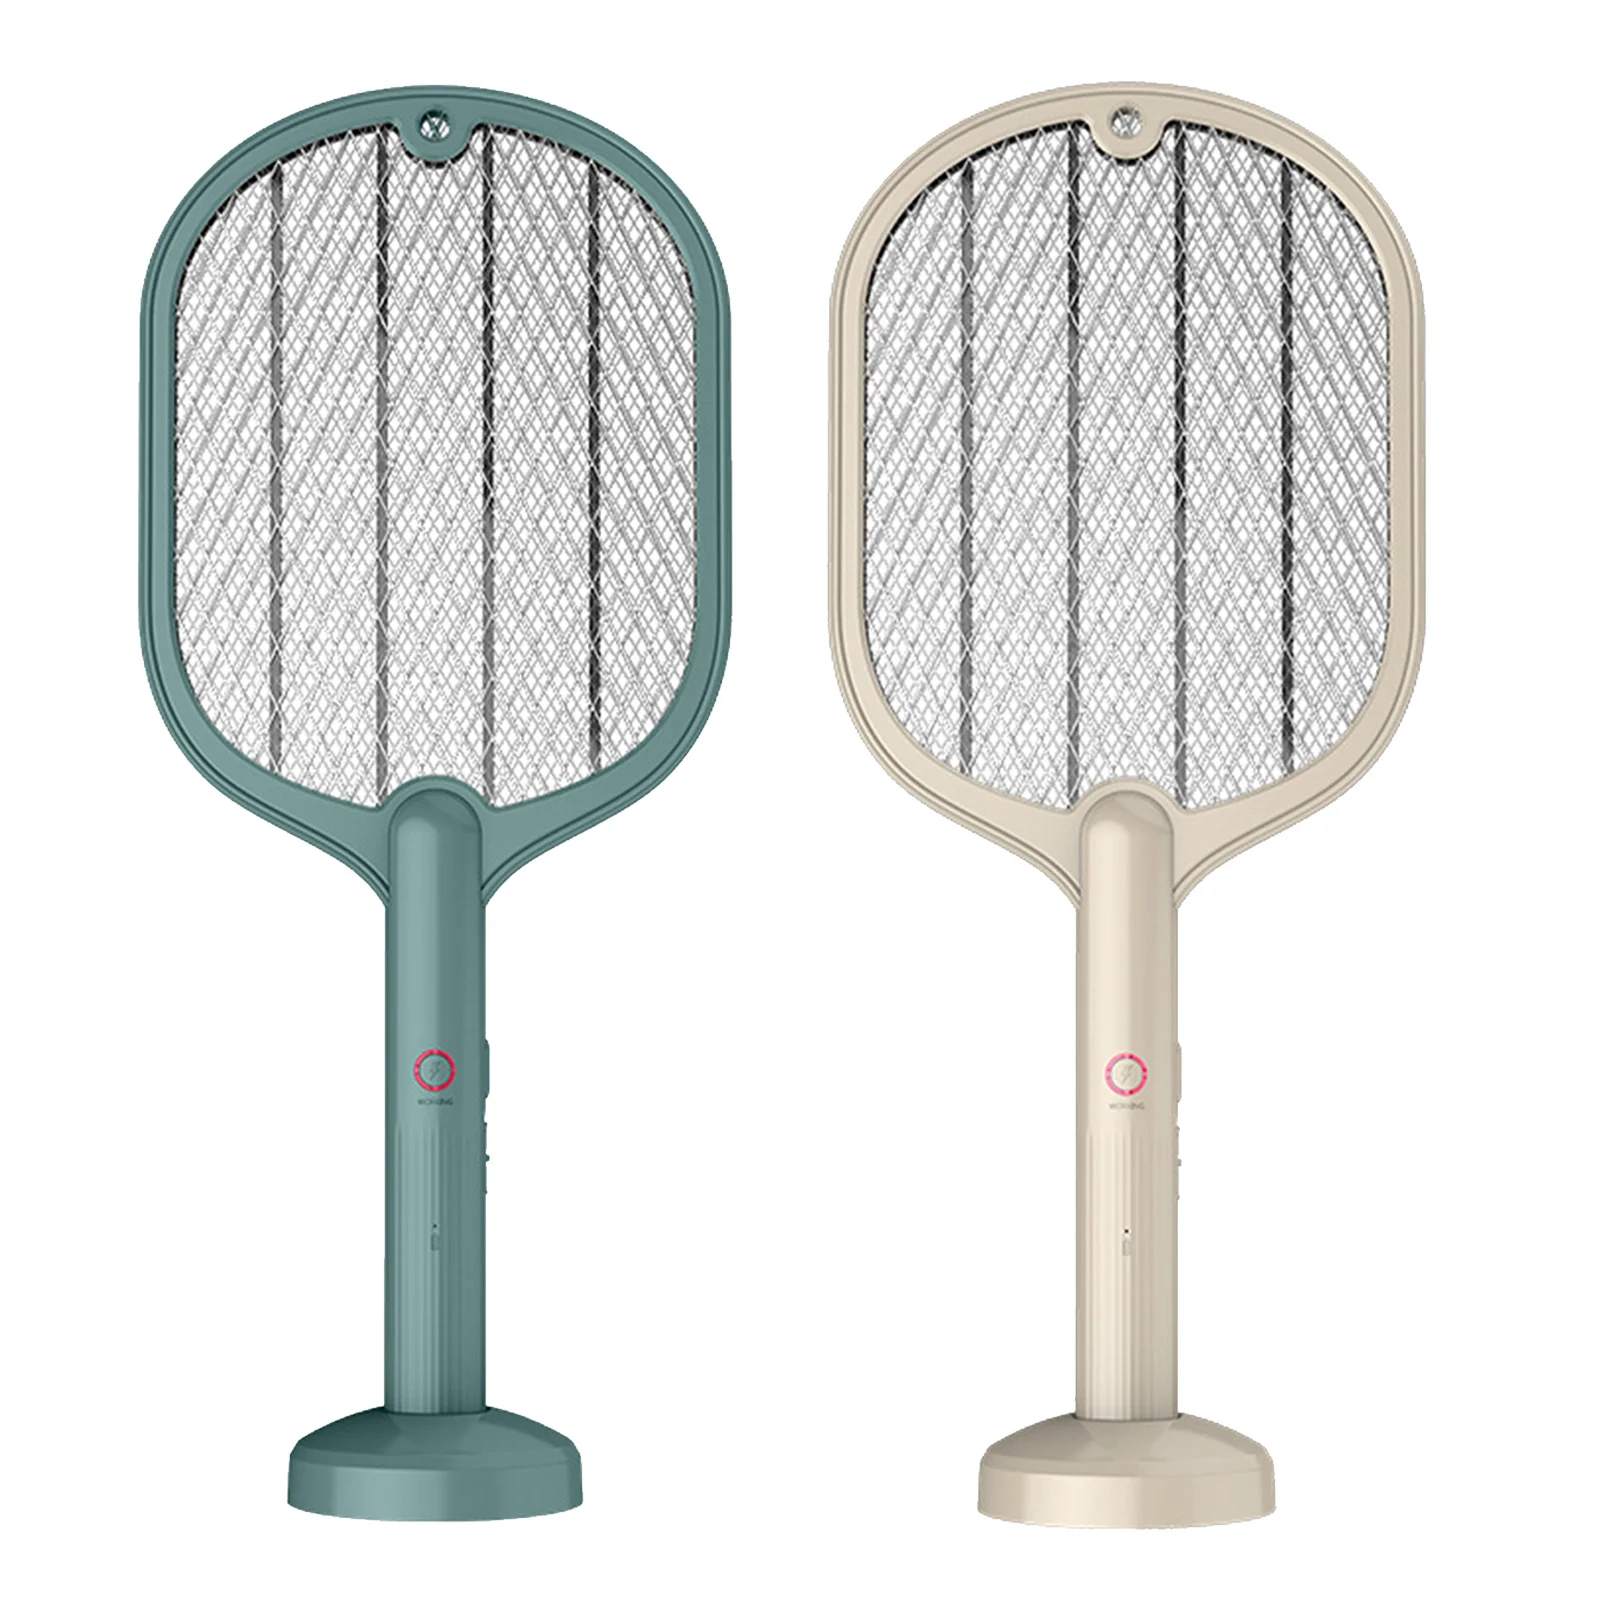 2 in 1 Electronic Mosquito Swatter USB Rechargeable Bug Wasp Fly Mosquito Pest Zapper Racket Killer Control